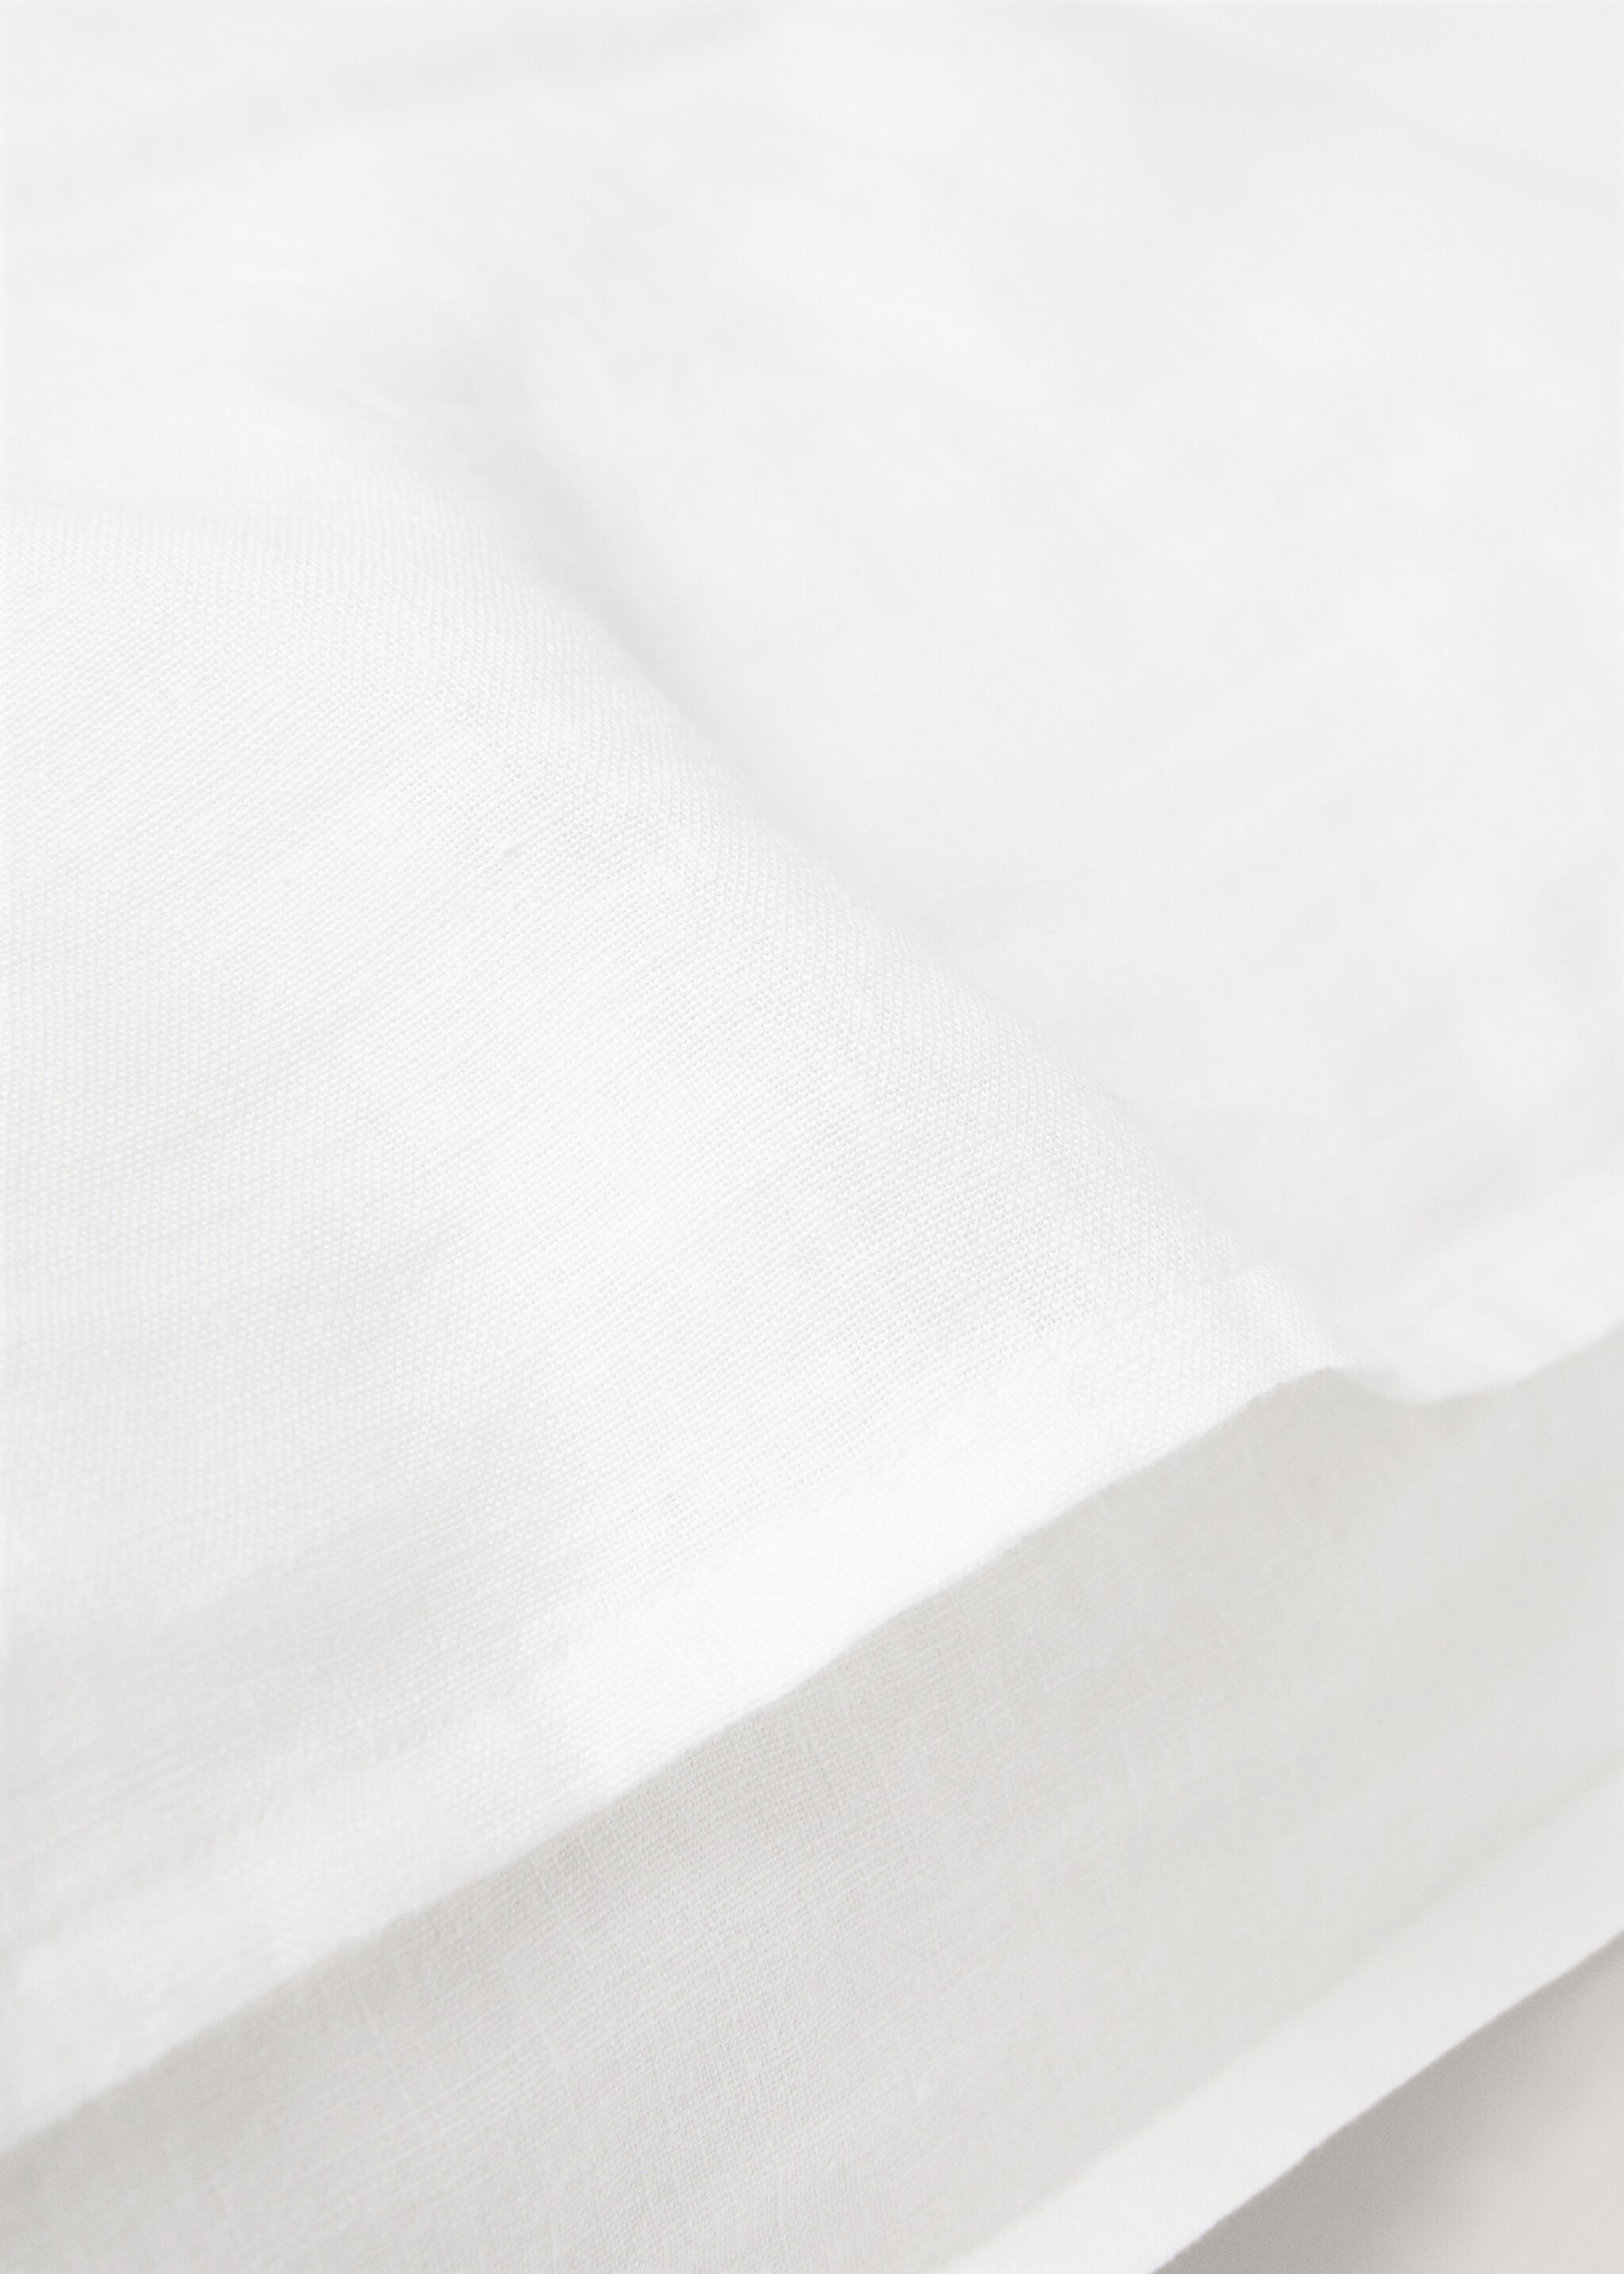 100% linen pillowcase 19.69x29.53 in - Details of the article 2